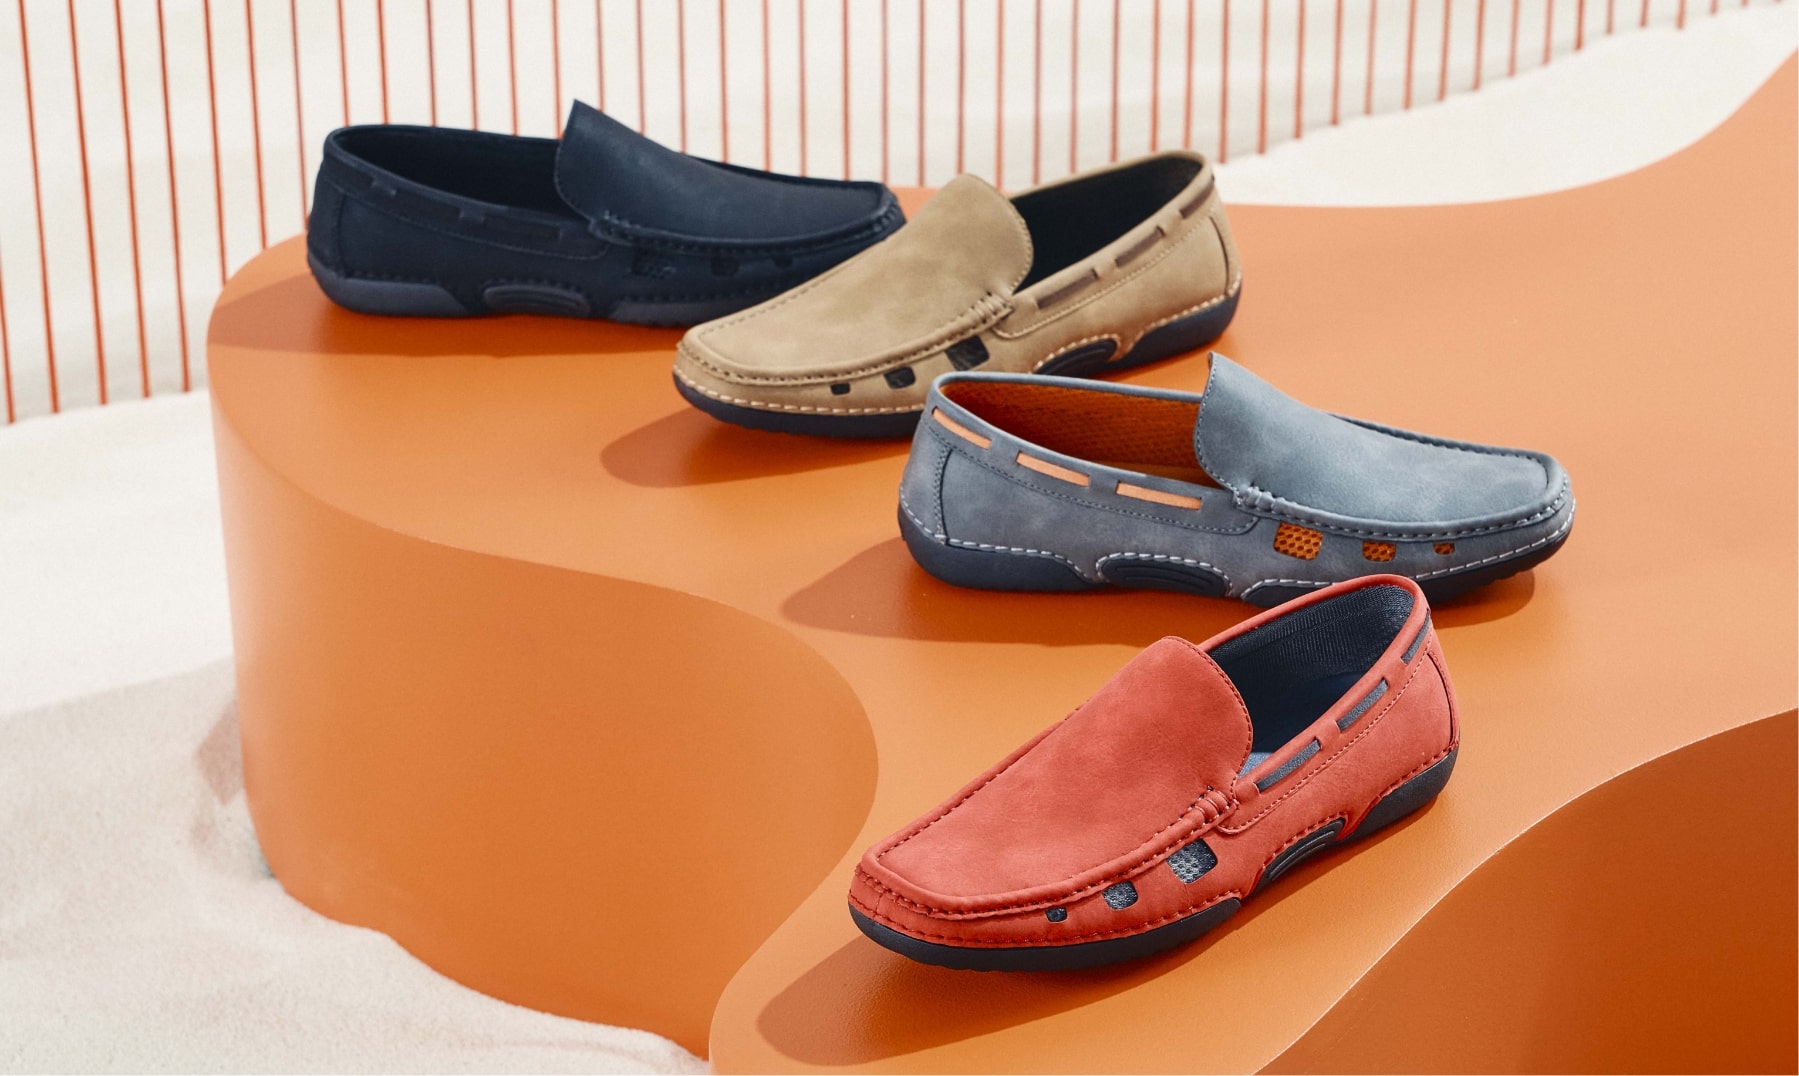 Click to shop Stacy Adams casuals. Image features the Delray in multiple colorways.